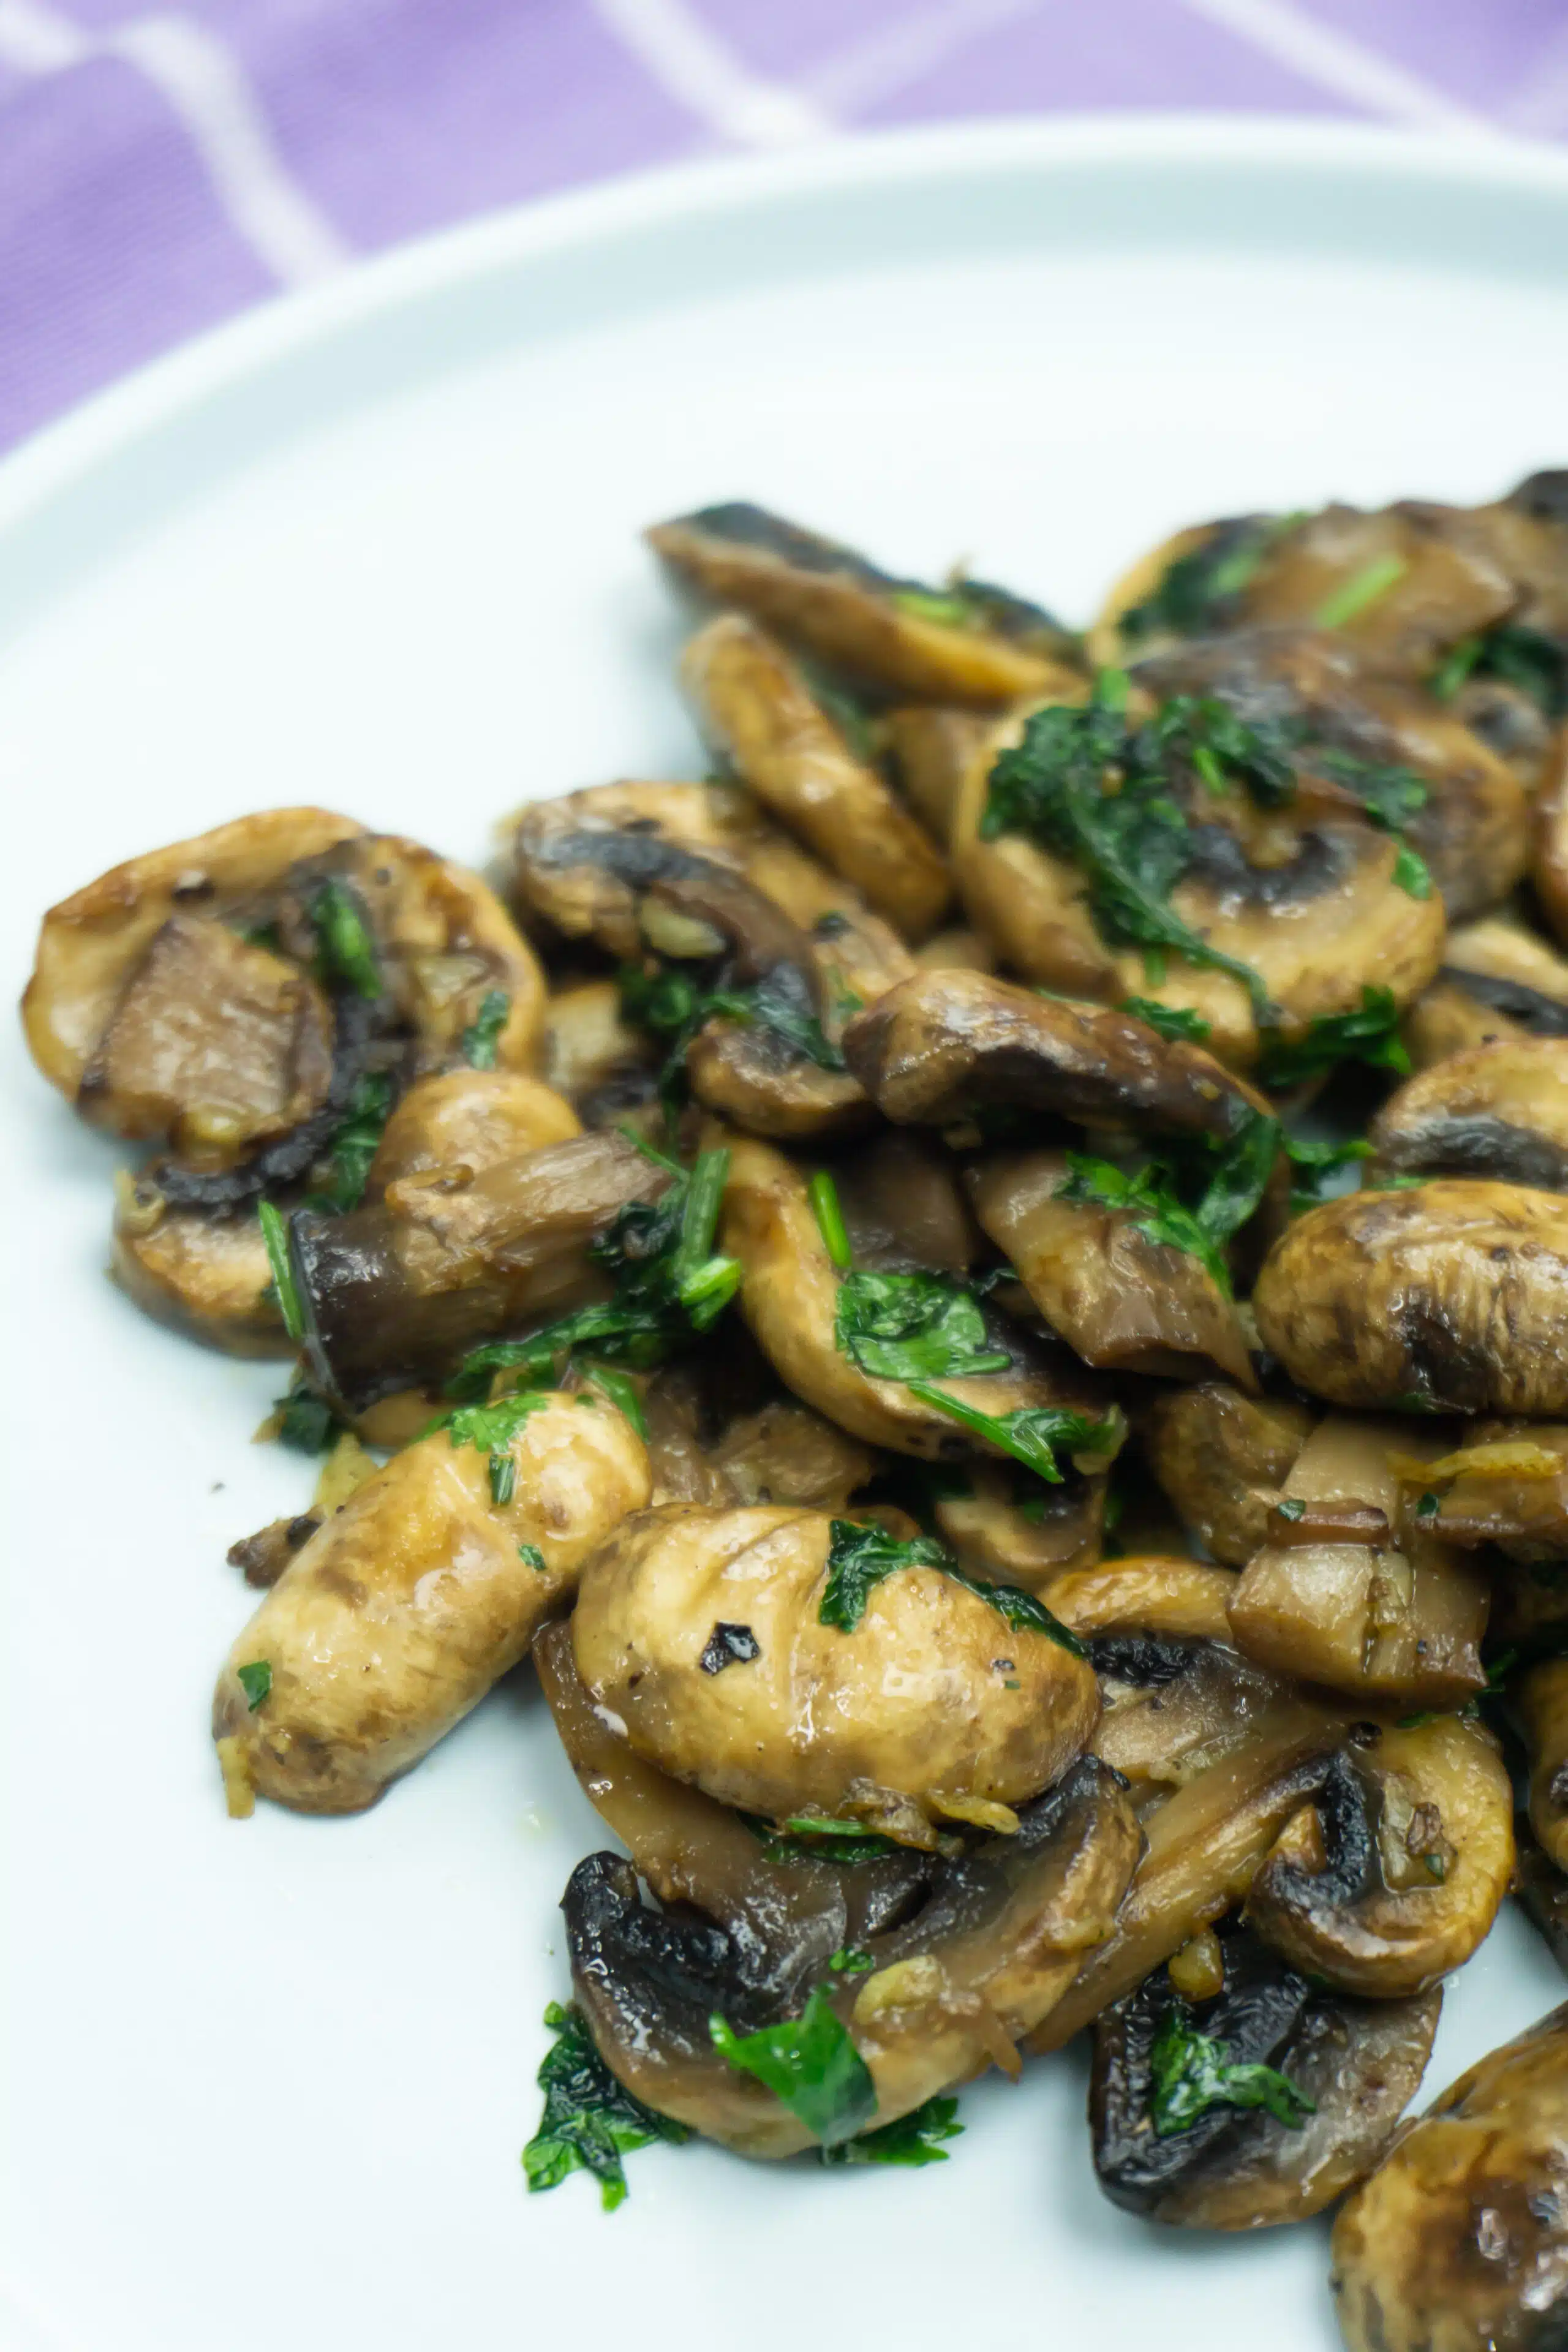 Steamed mushrooms with garlic and parsley butter